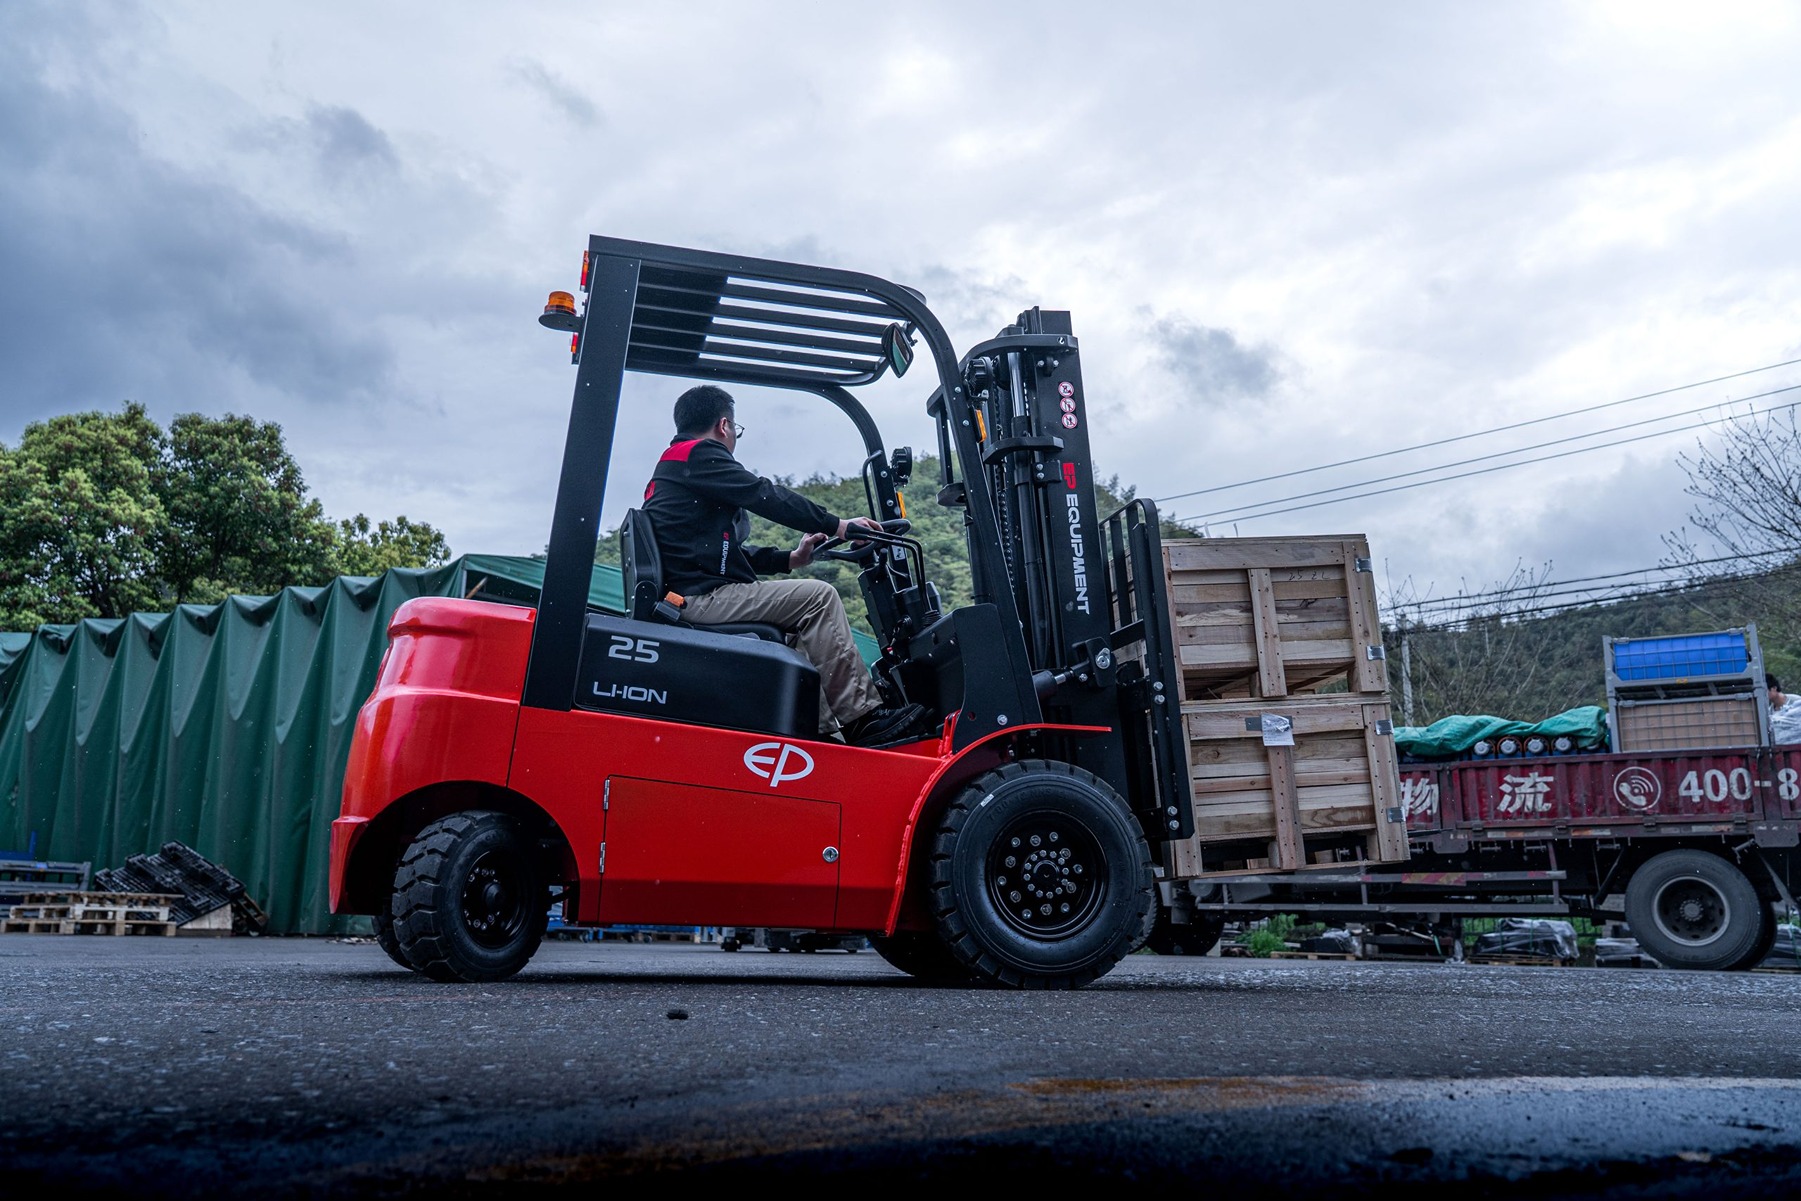 EFL252X forklift truck transporting loads in outdoor environment.